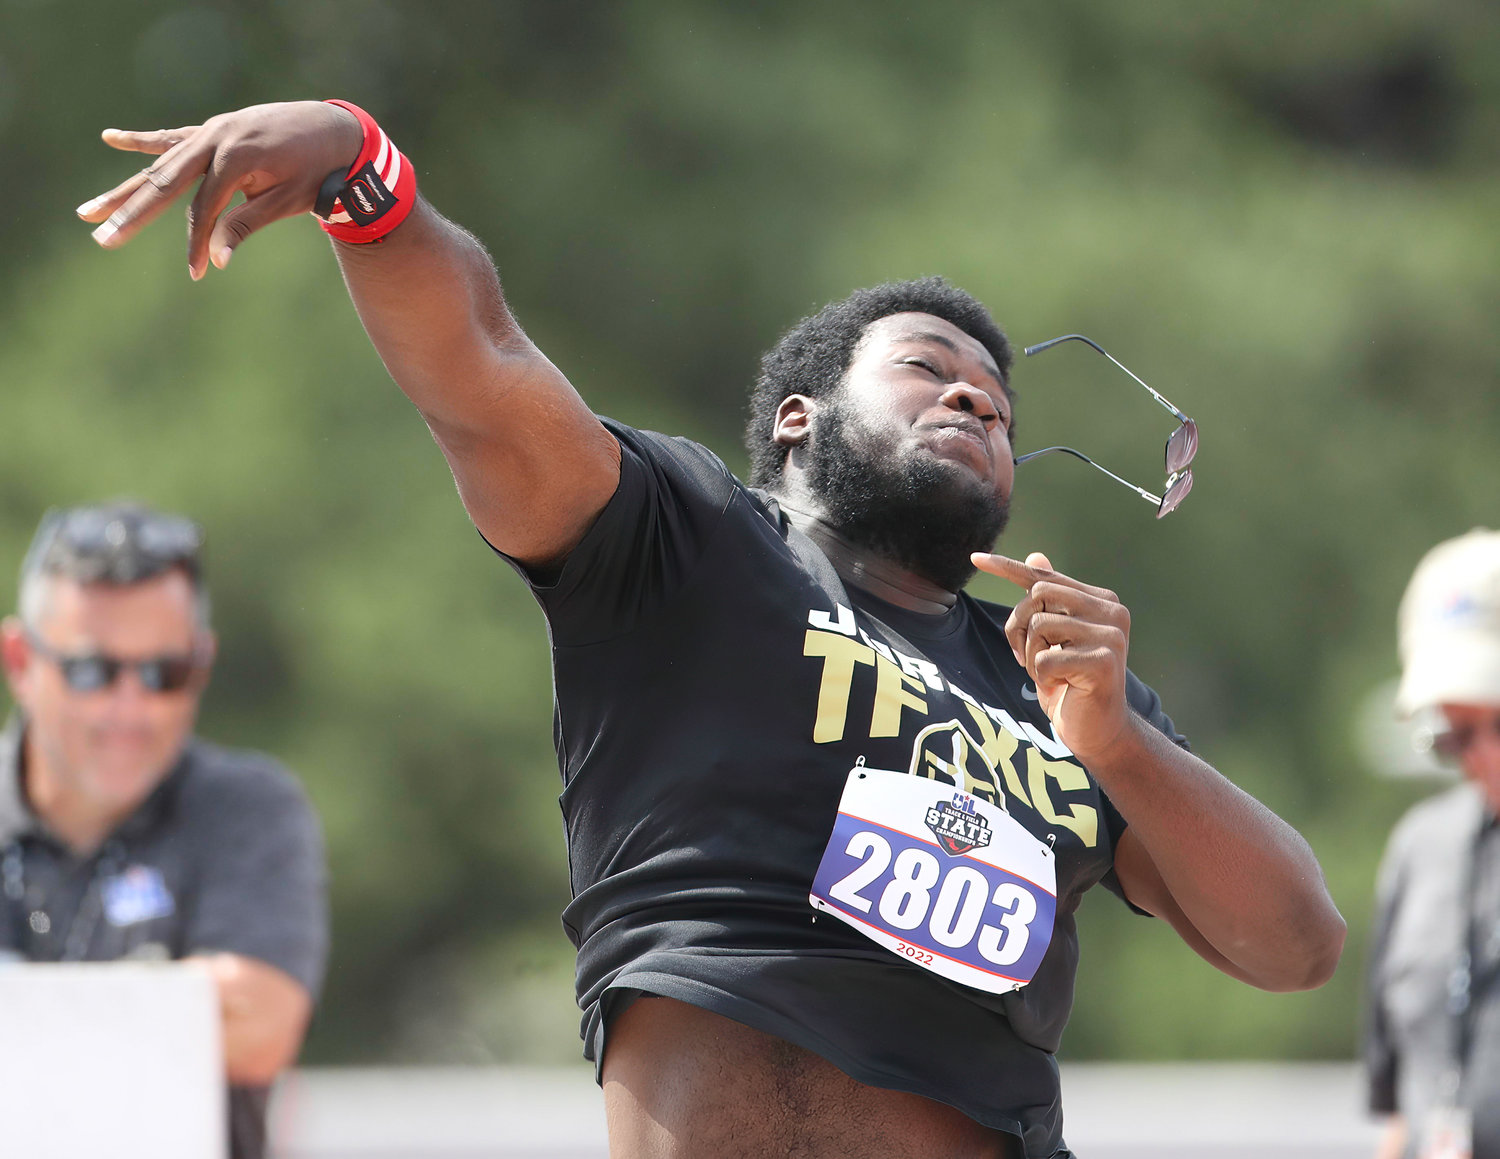 Sheldon Peters of Katy Jordan competes in the Class 5A boys shot put event at the UIL State Track and Field Meet on May 13, 2022 in Austin, Texas.